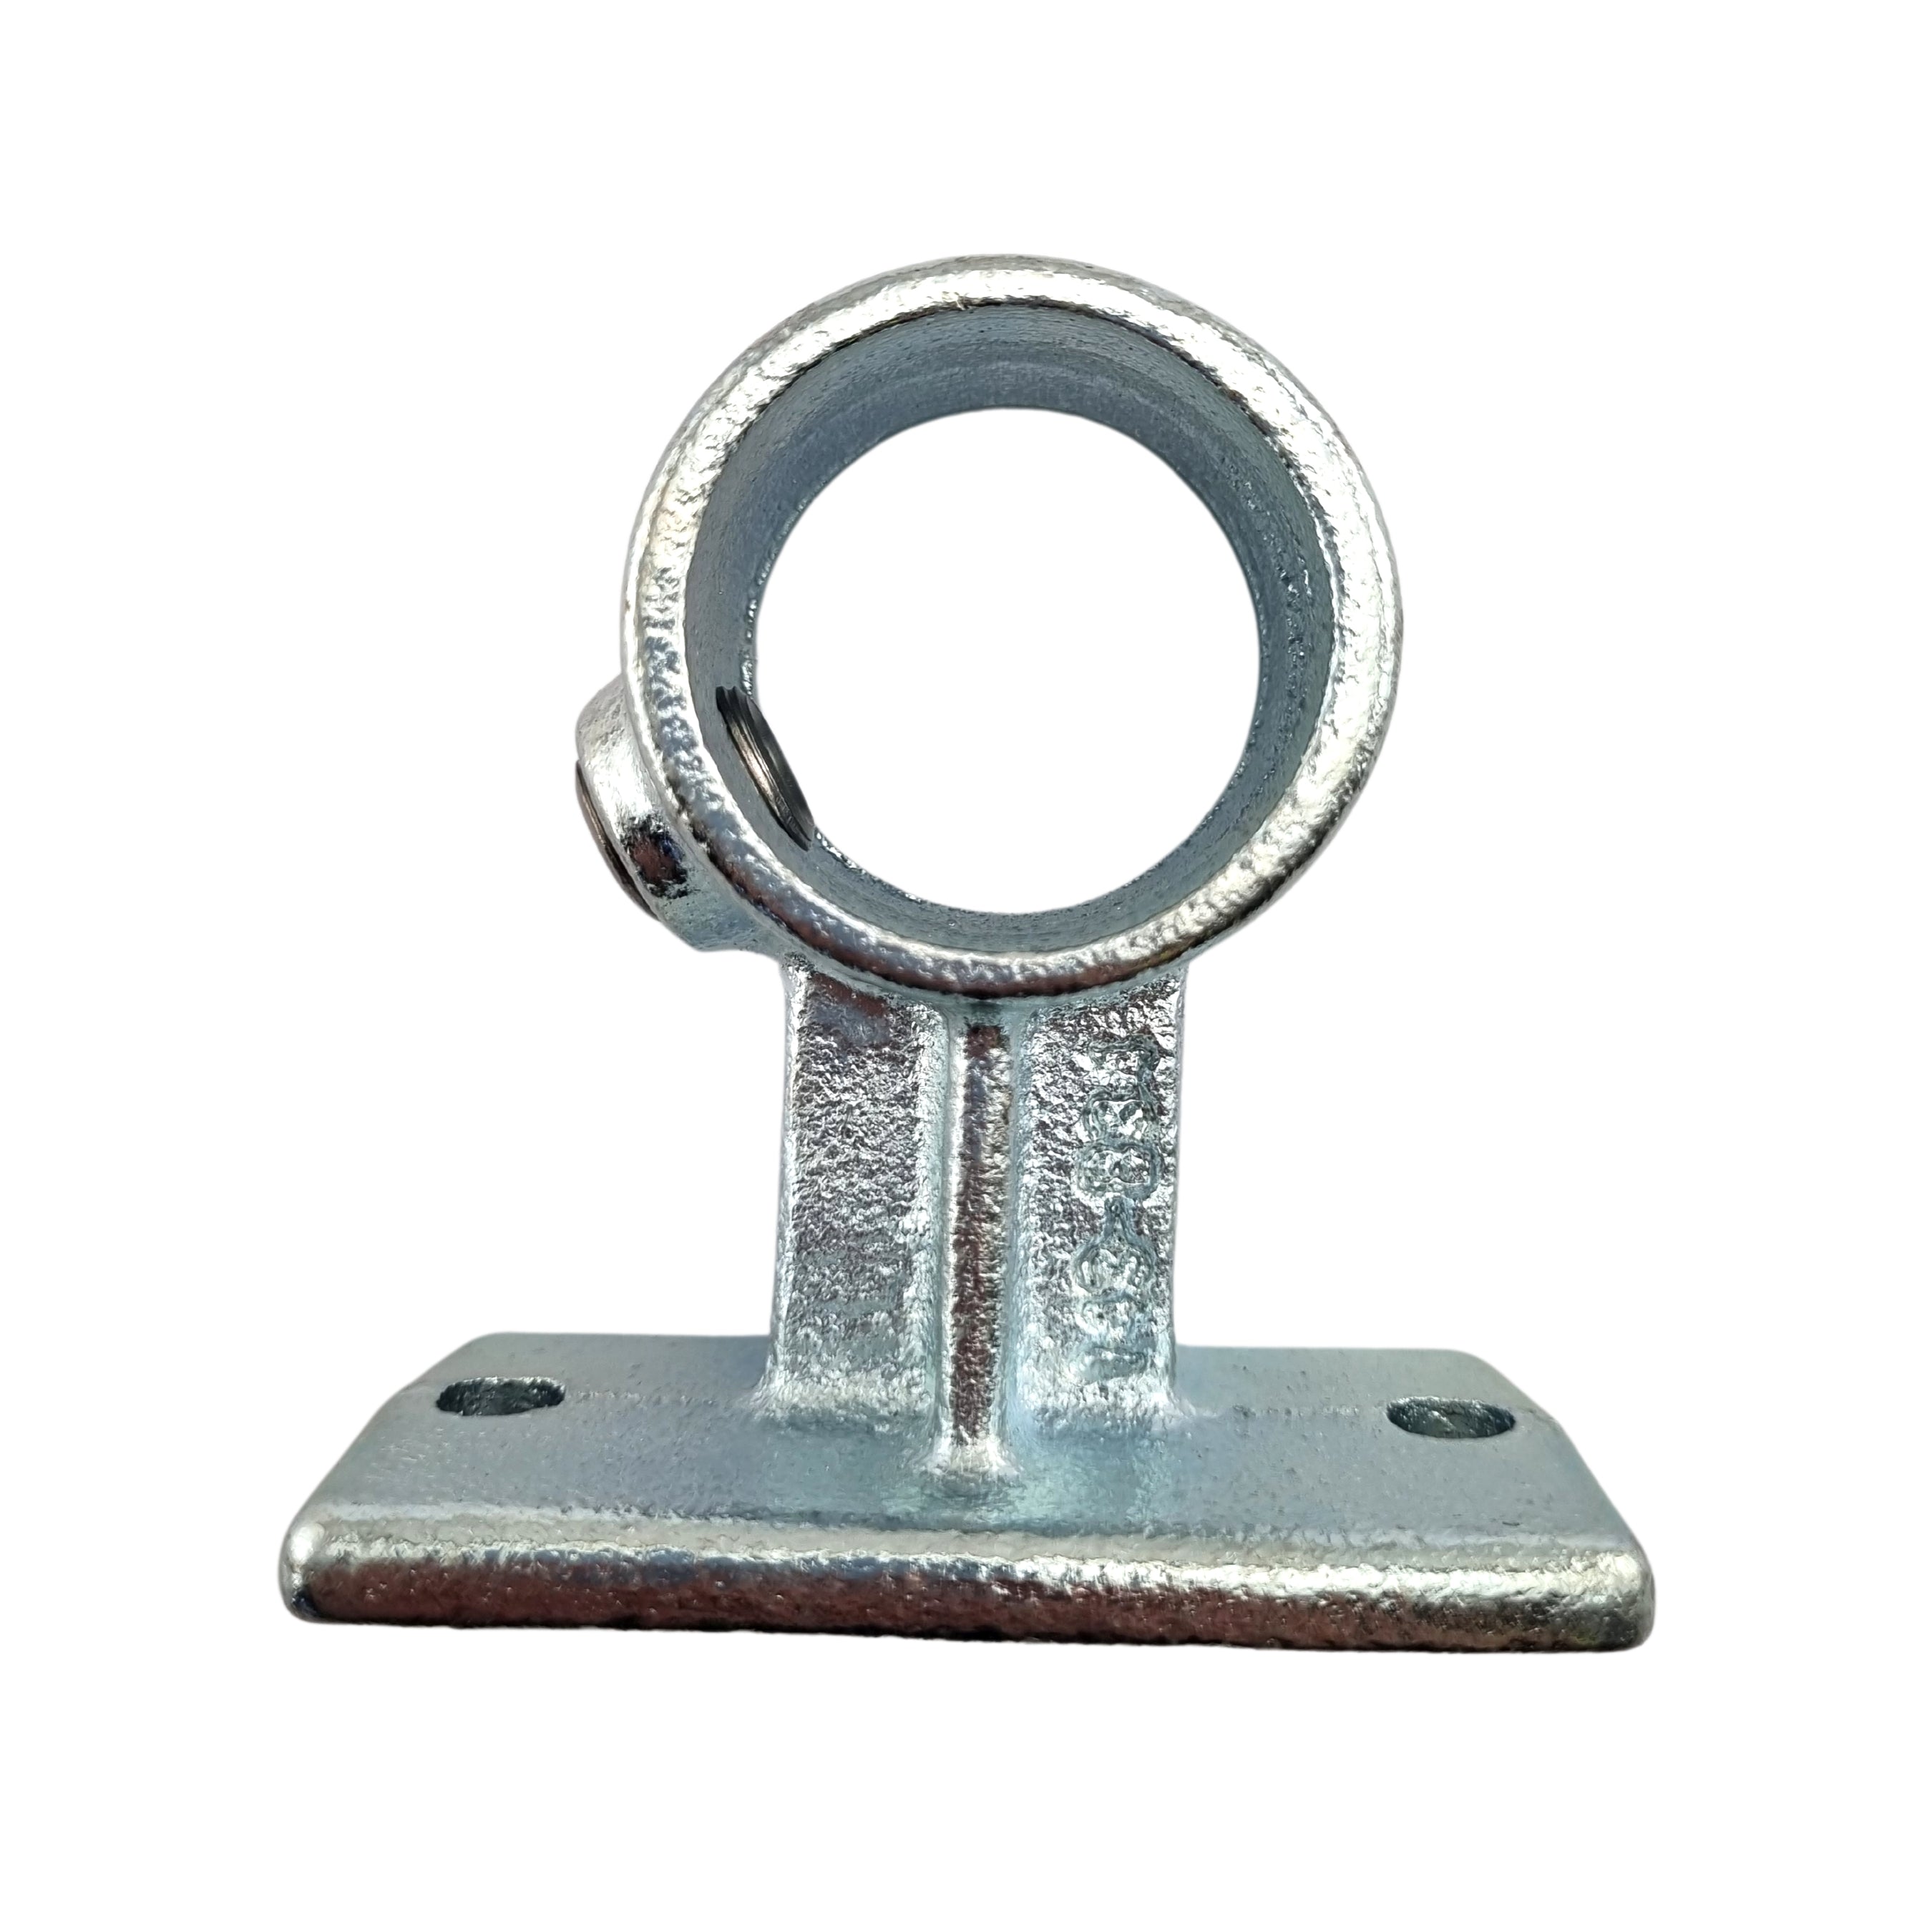 Handrail Bracket for Galvanised Pipe. Interclamp Code 143. Shop rail & pipe fittings online chain.com.au. Australia wide shipping.